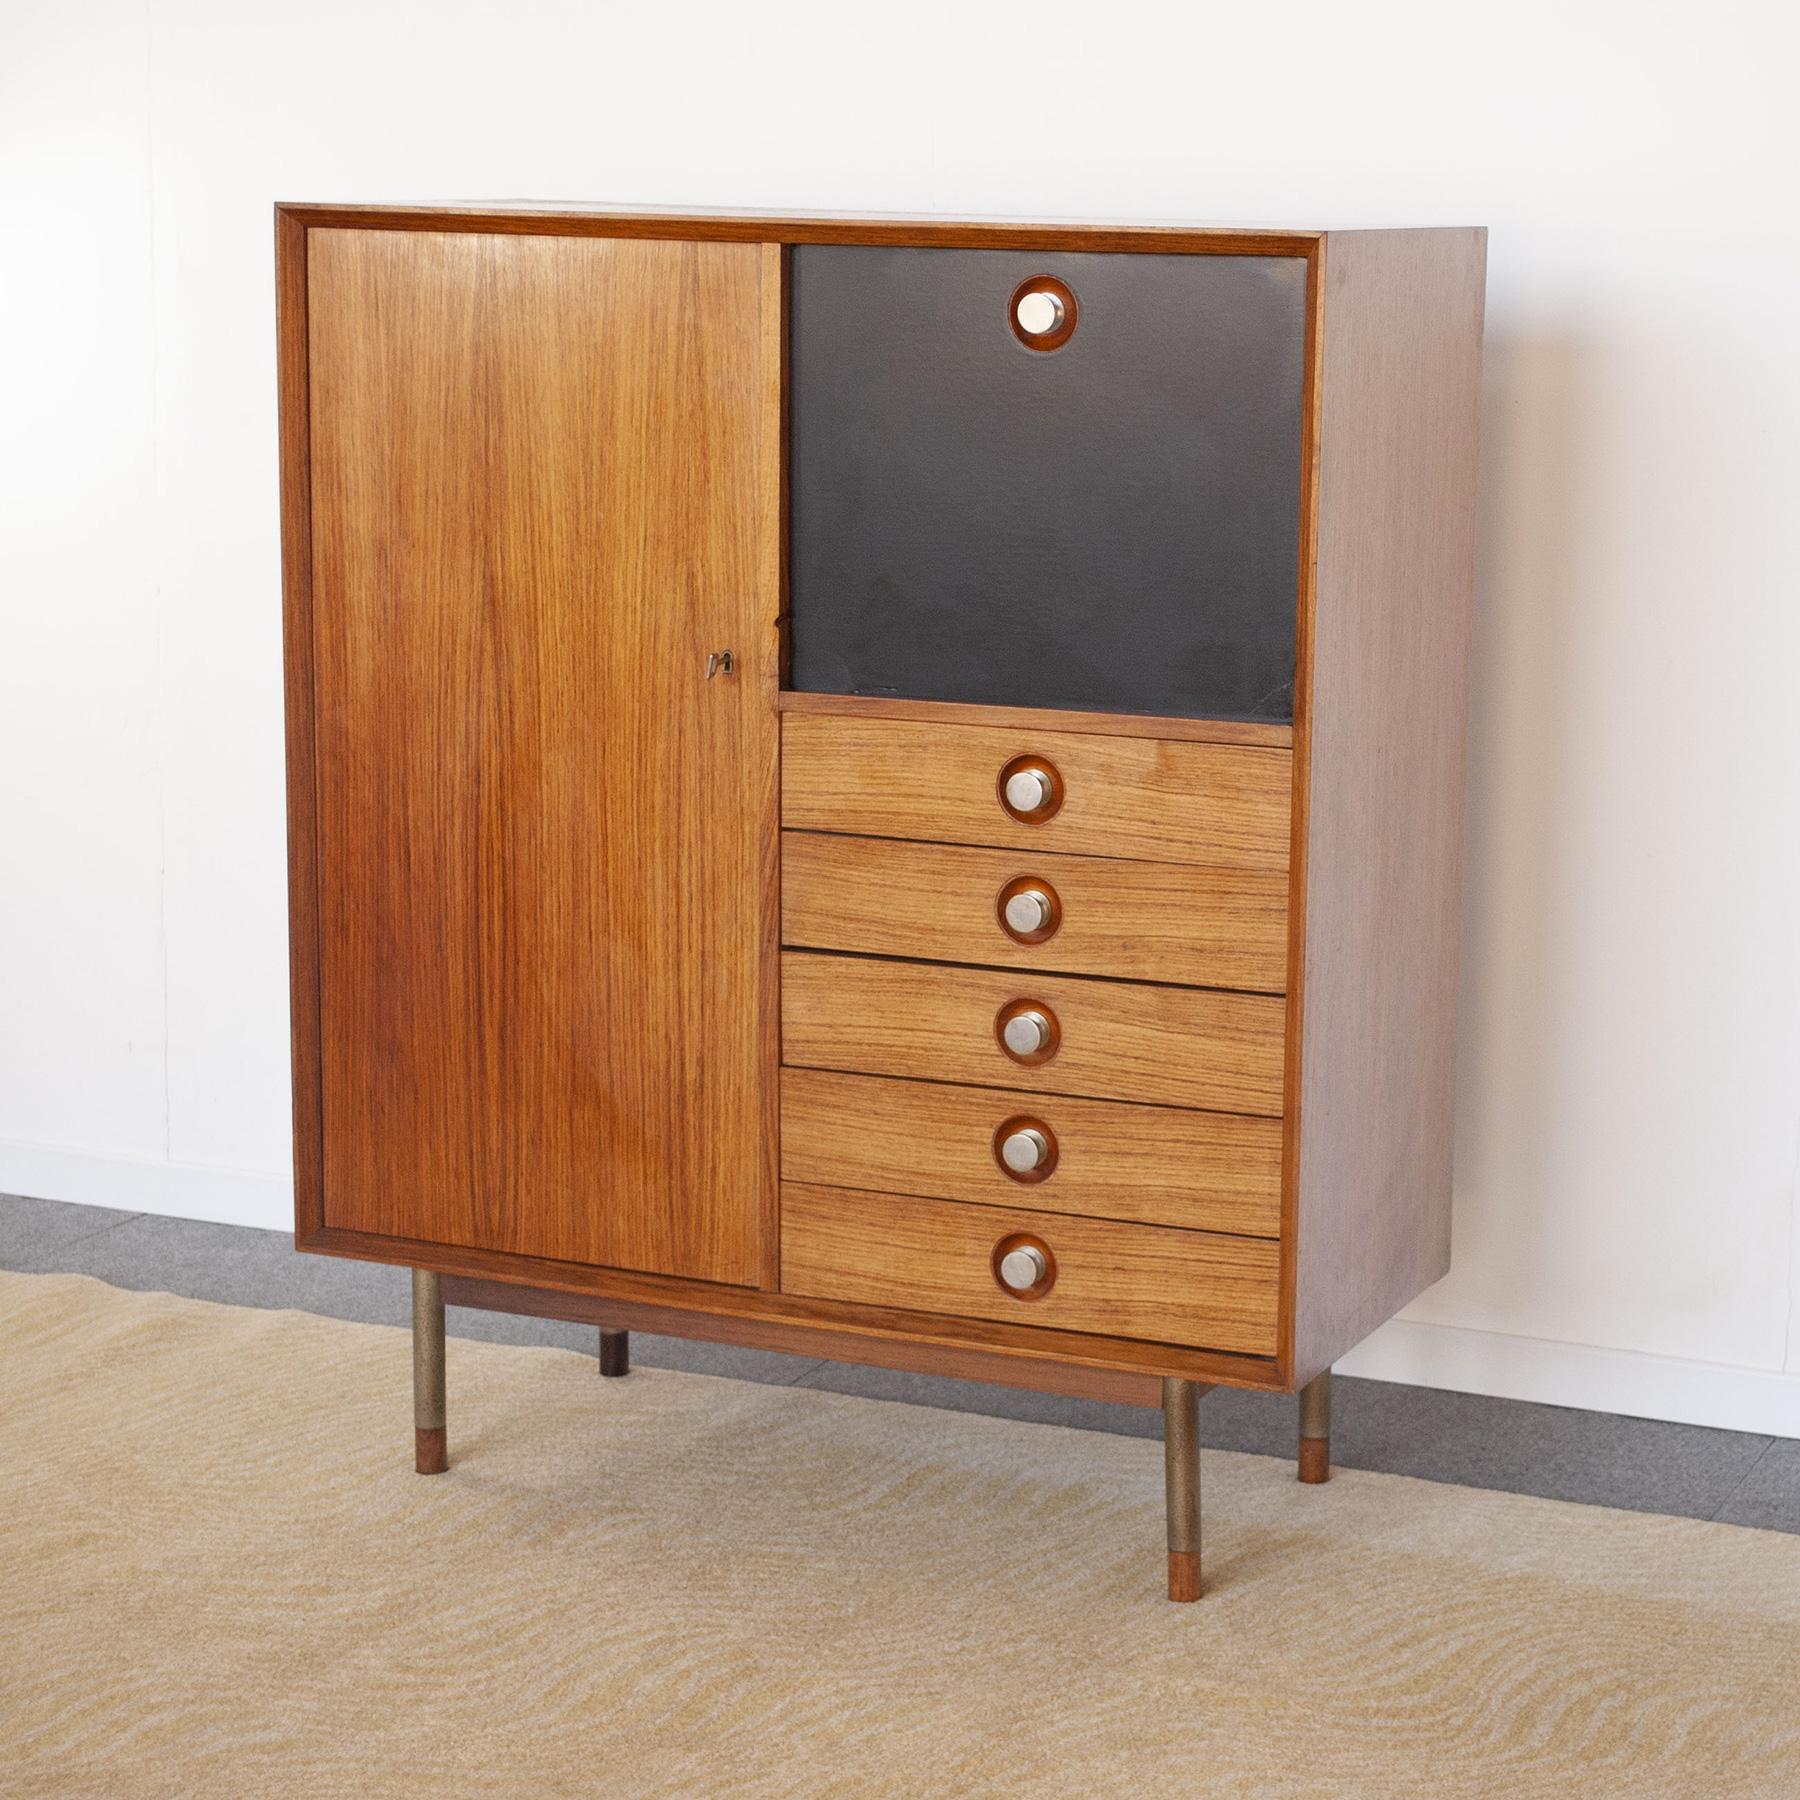 Central American George Nelson Highboard from the Sixties